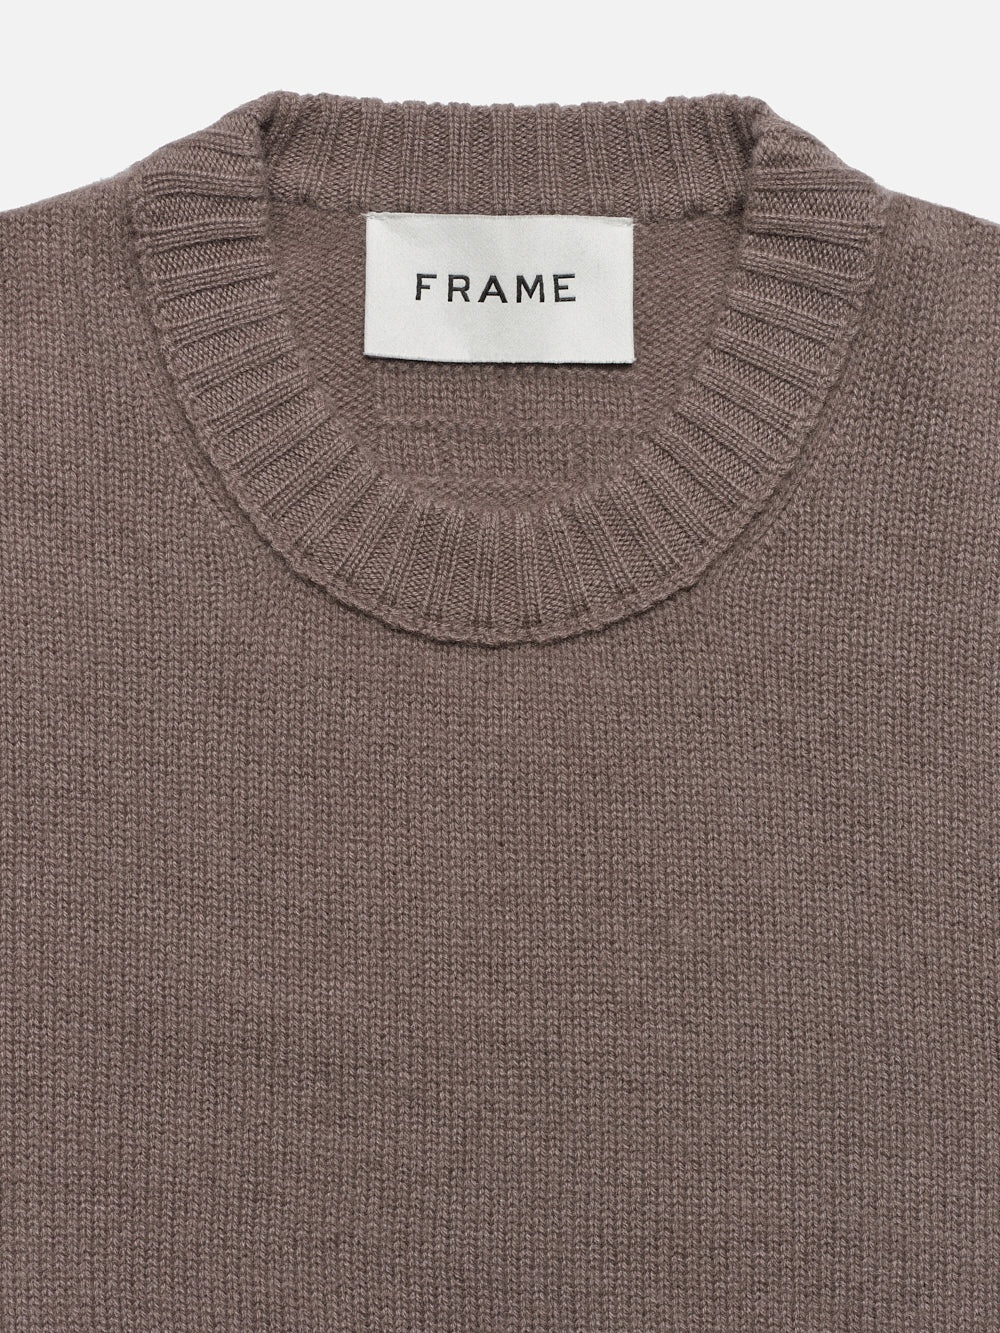 The Cashmere Crewneck Sweater in Dry Rose - 2